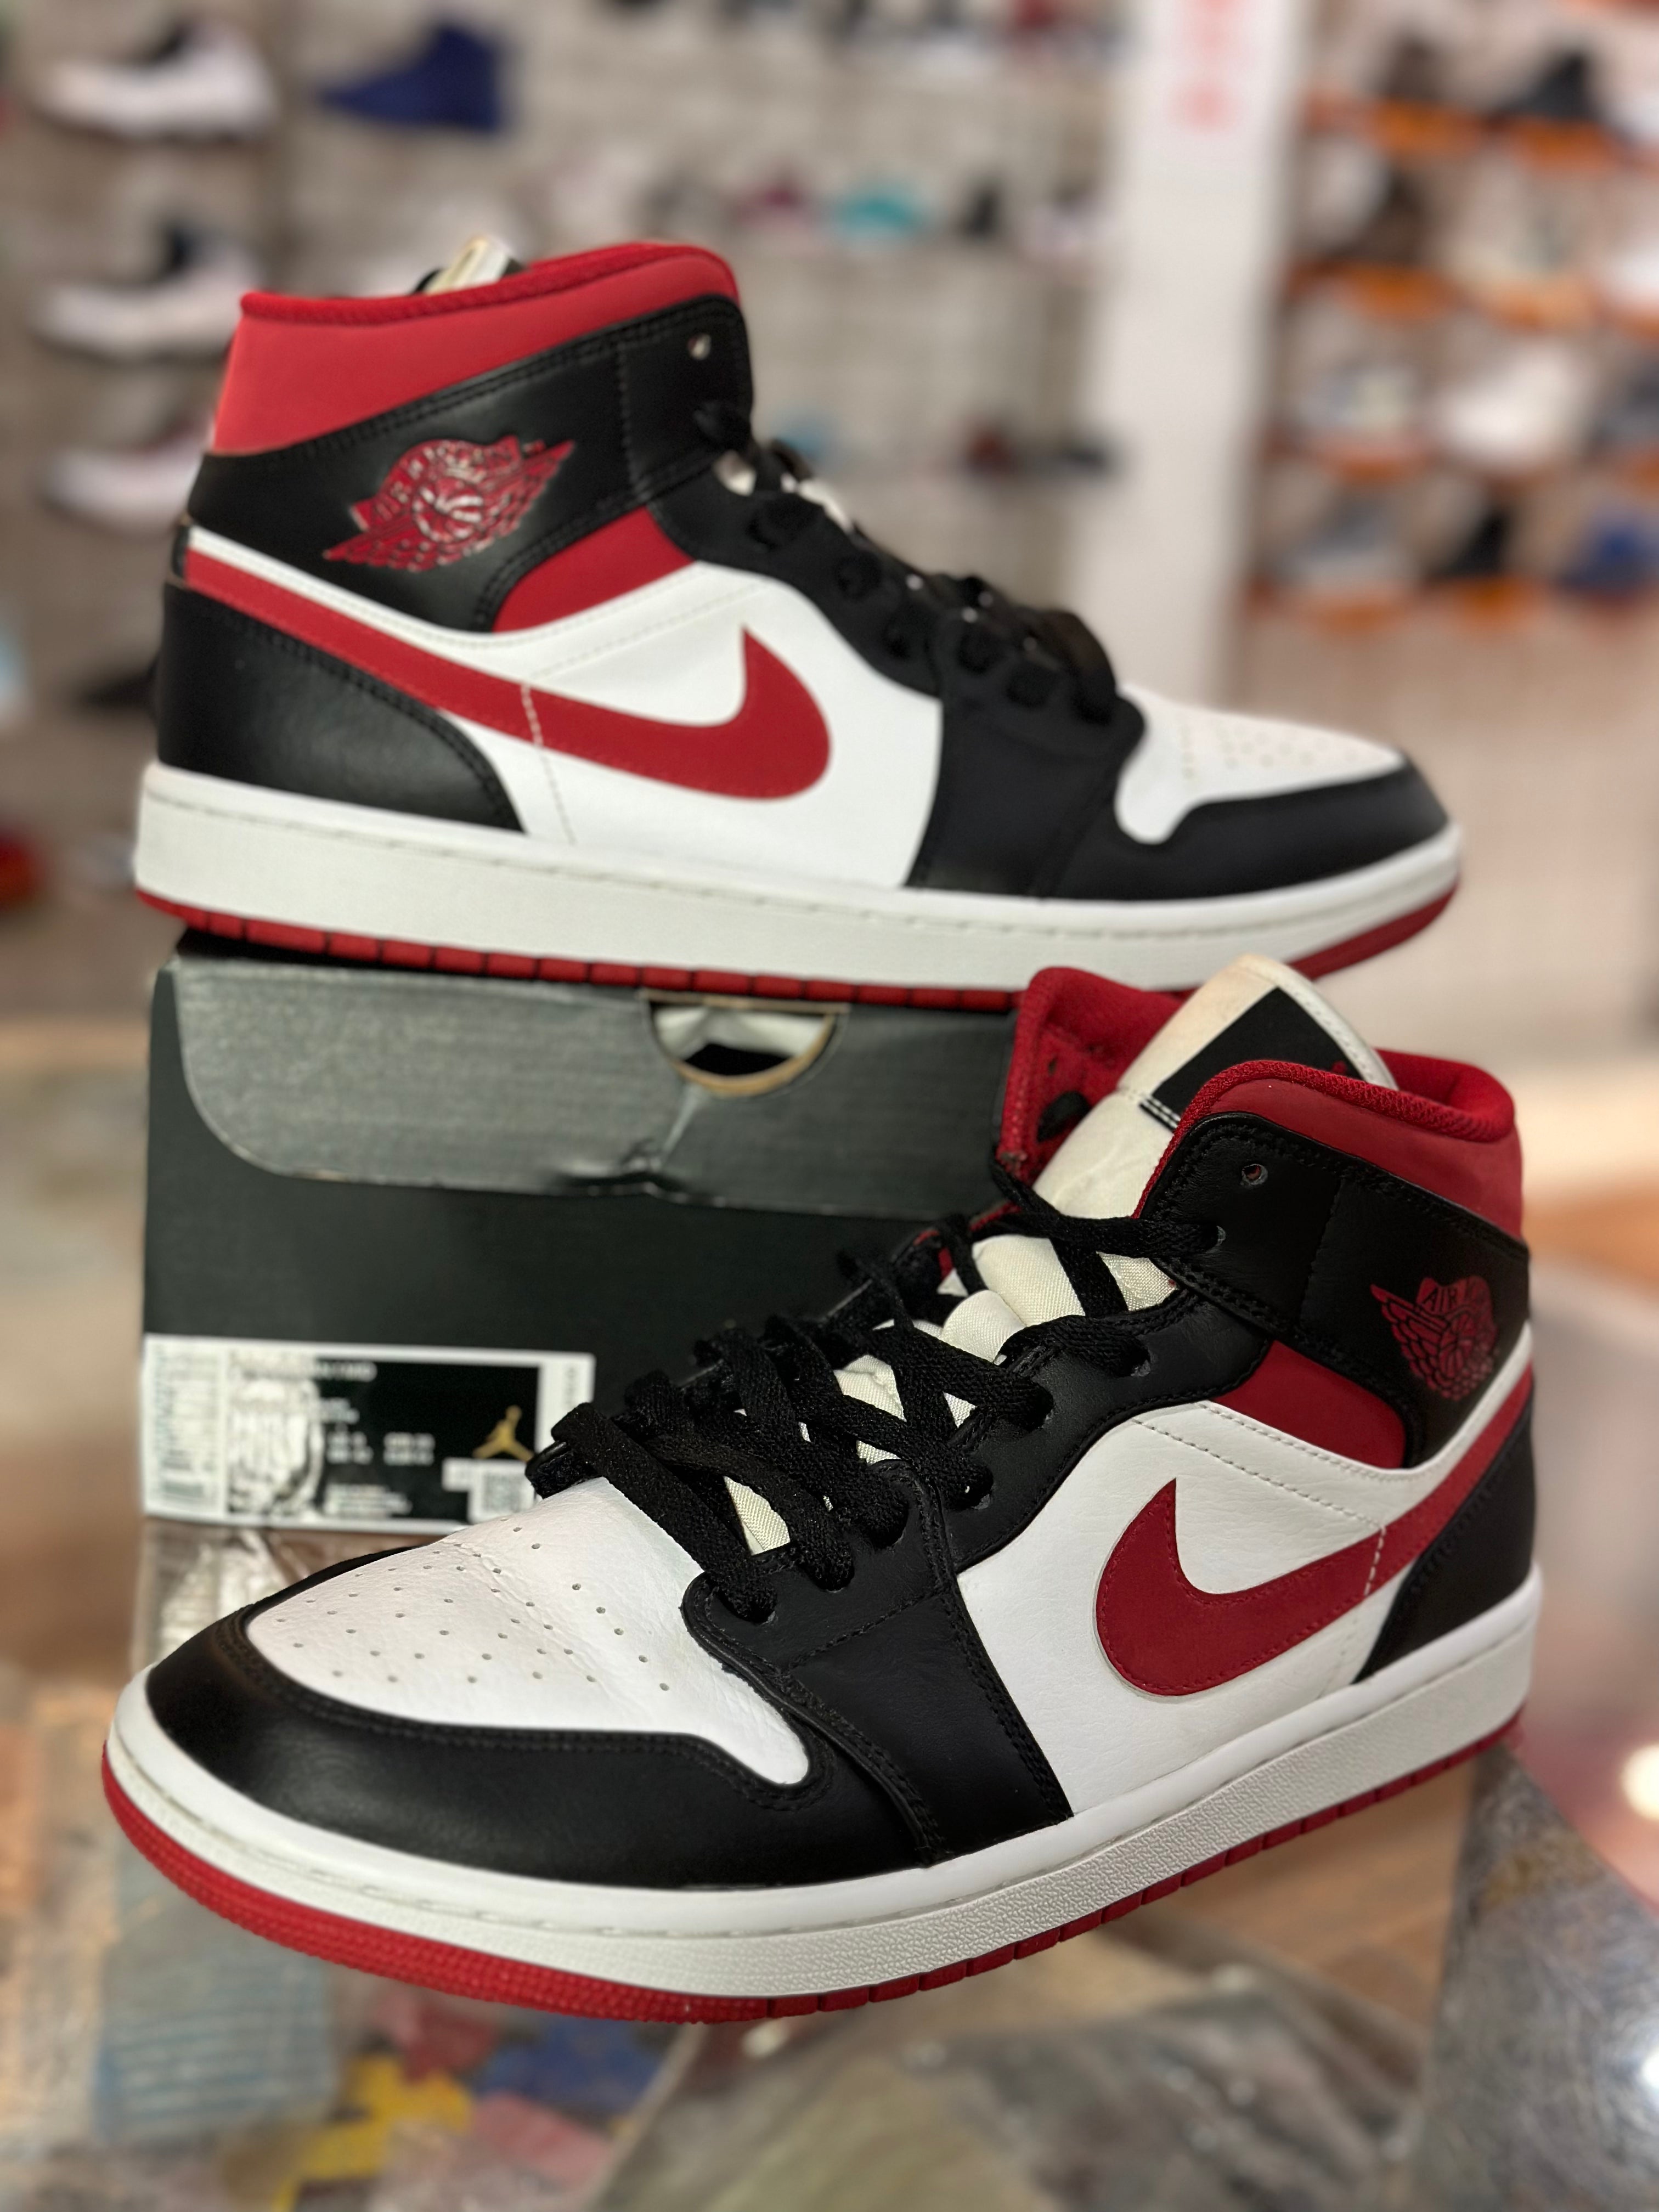 Gym Red 1s size 10